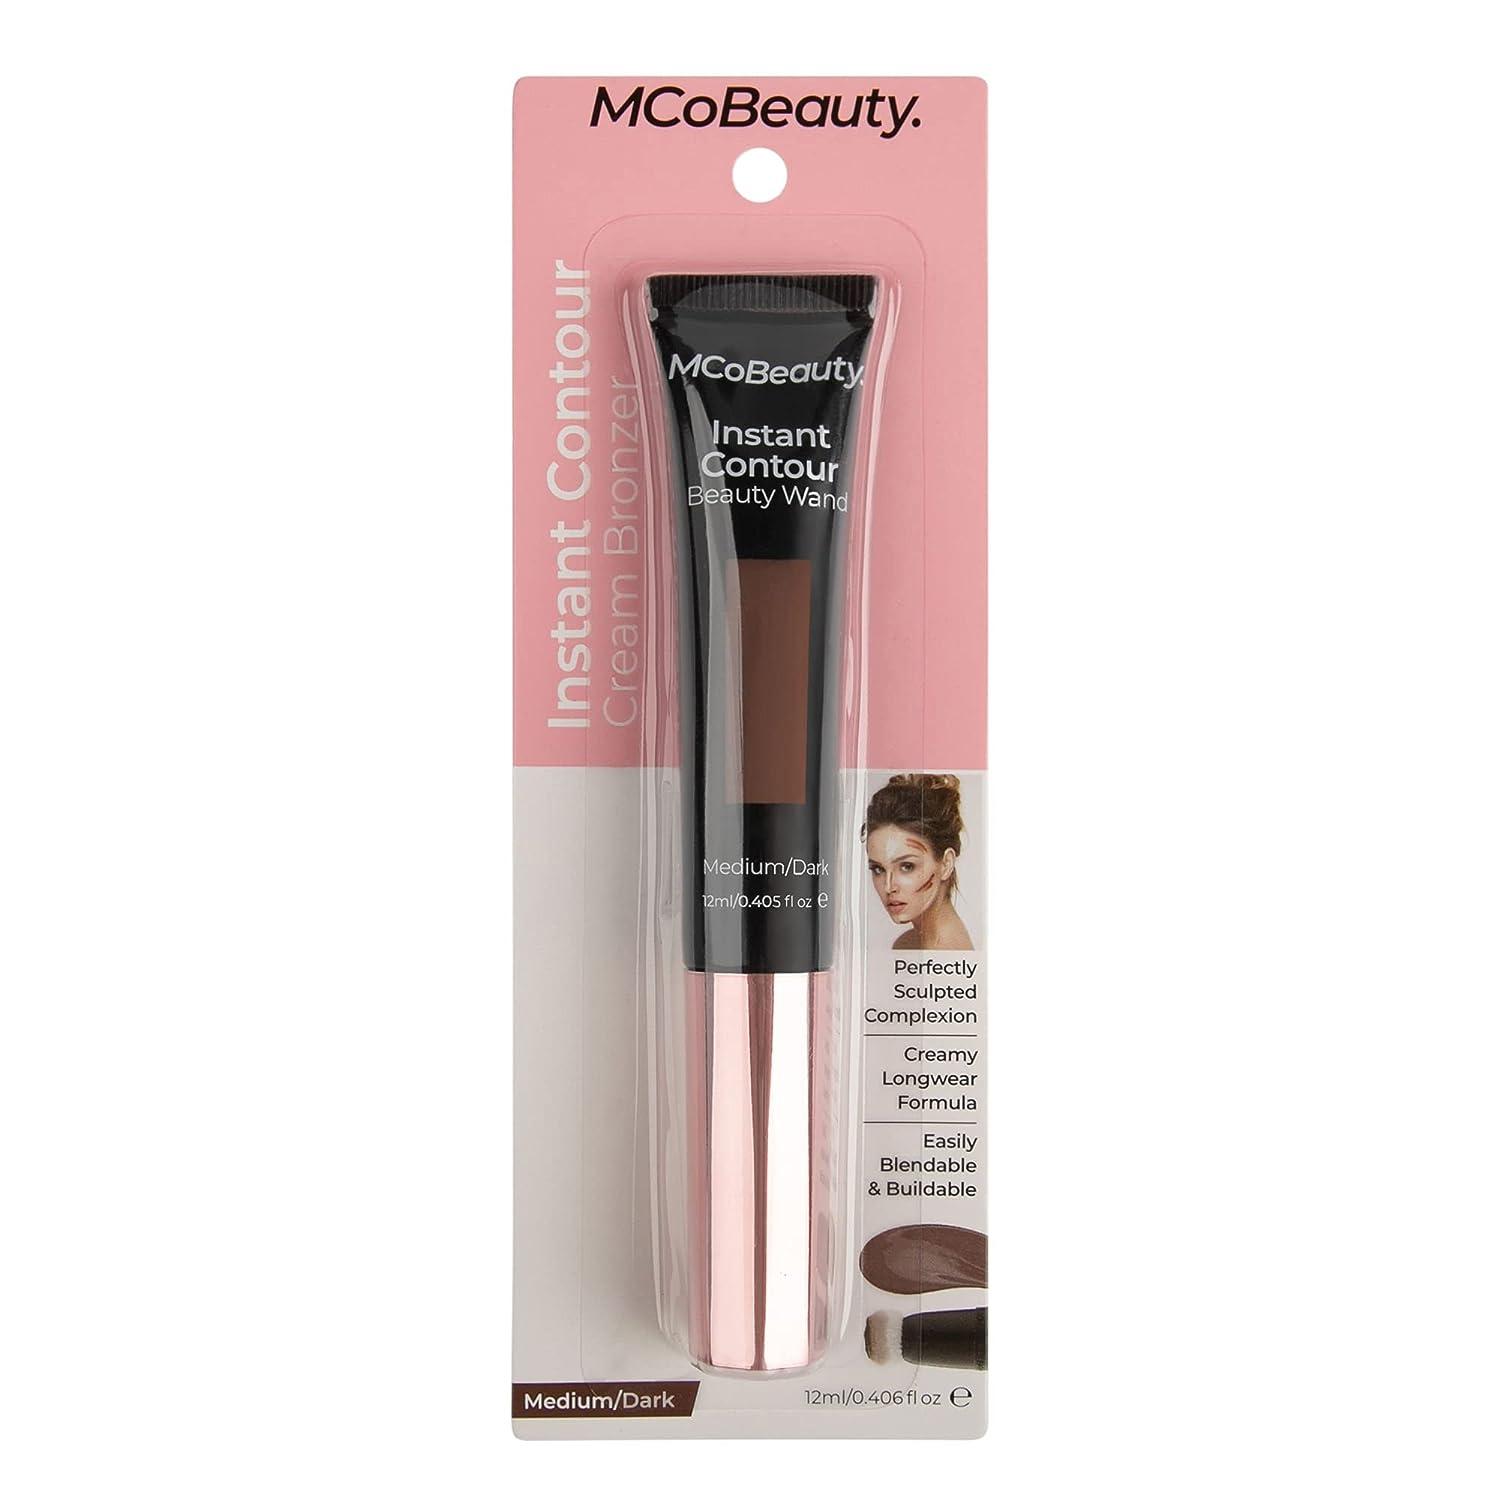 MCoBeauty Instant Contour Beauty Wand - Achieve Perfectly Sculpted  Complexion - No Harsh Lines Or Edges - Defines Features - Blends Seamlessly  Into Skin - Buildable Formula - Medium/Dark - 0.4 Oz